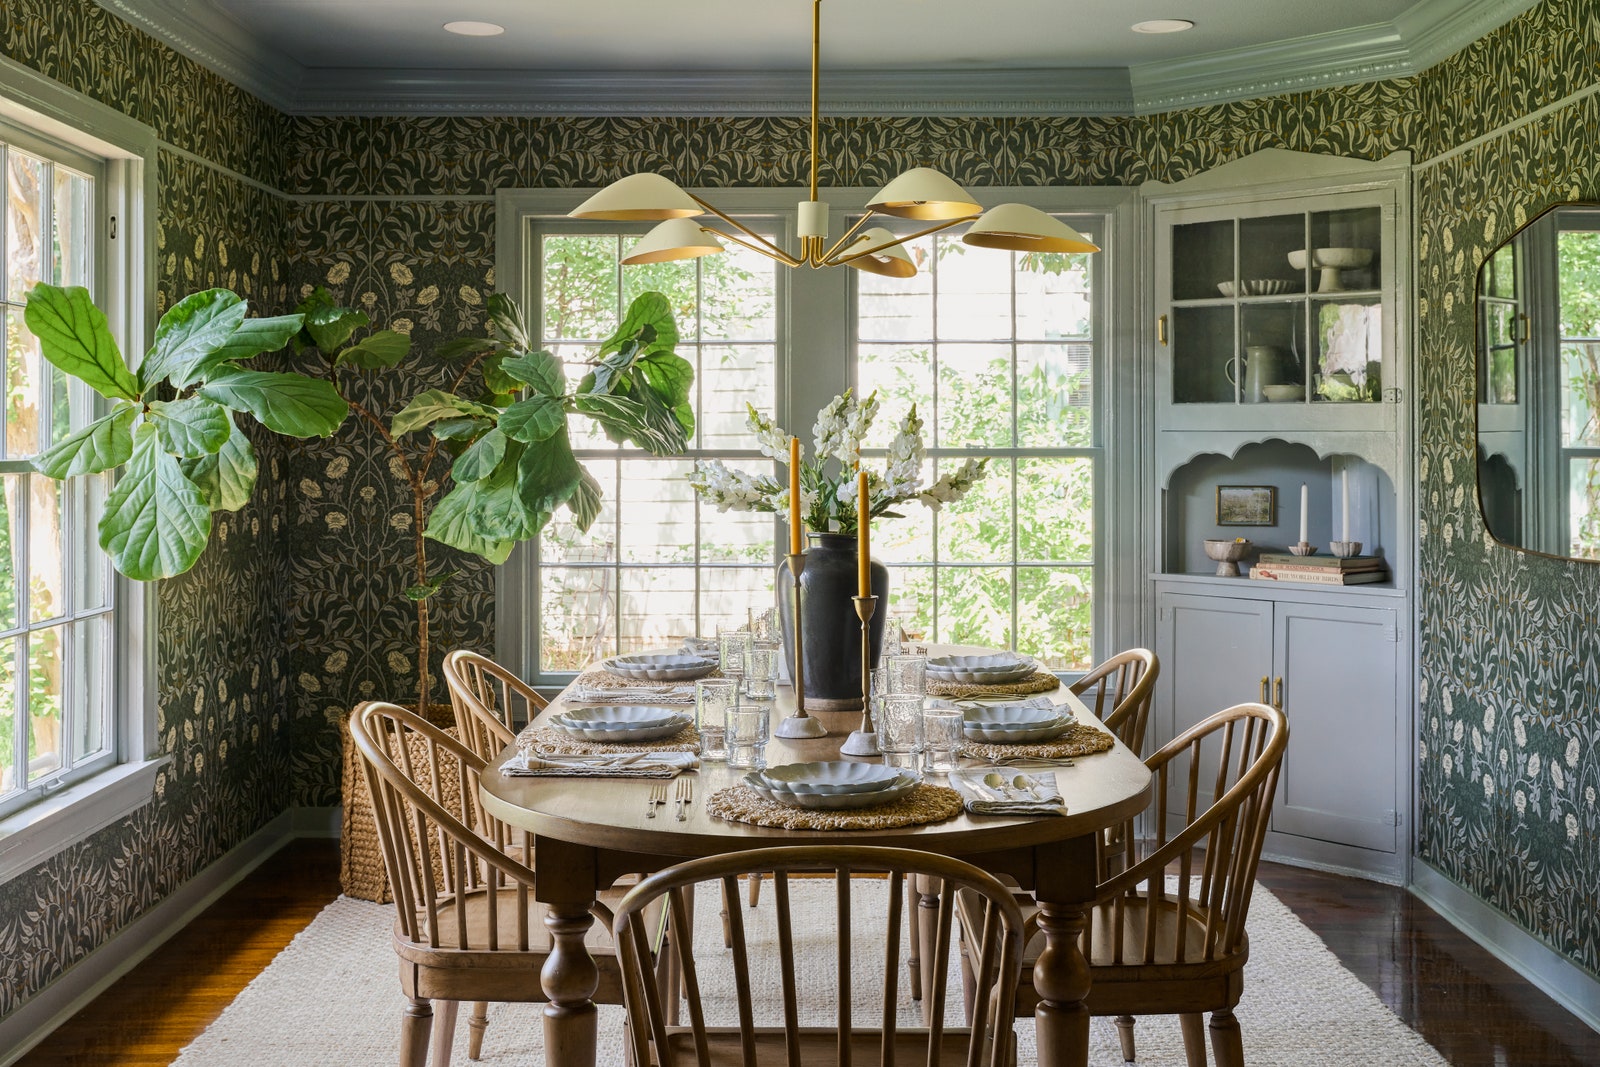 The coziness of the dining room owes a lot to the inviting botanical wallpaper which is a vinyl peelandstick option from...